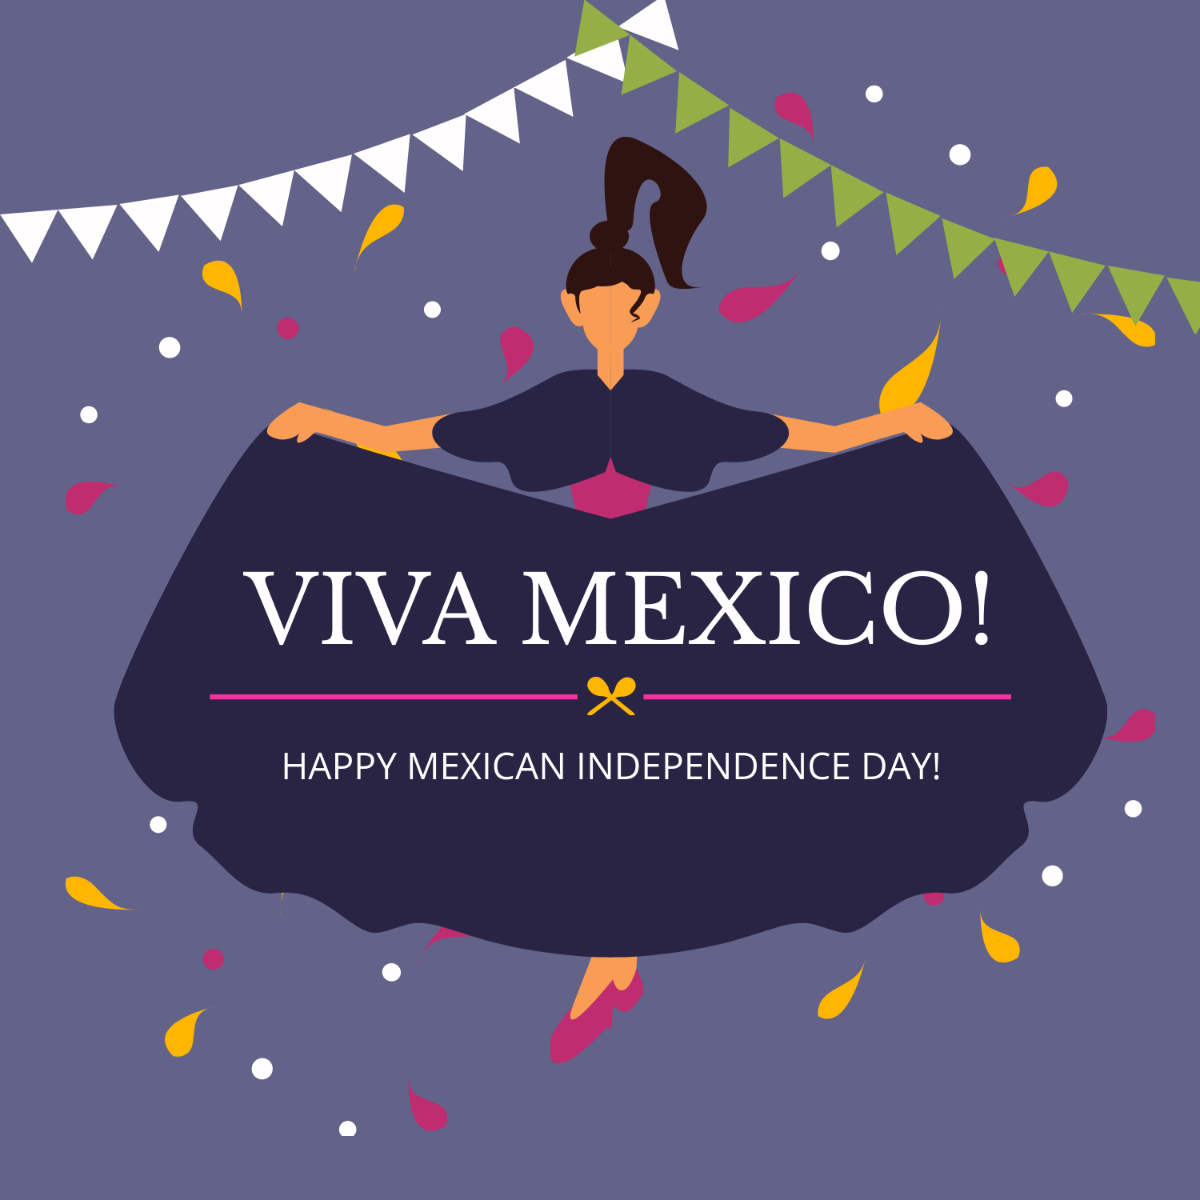 Free Mexican Independence Day Illustration Template